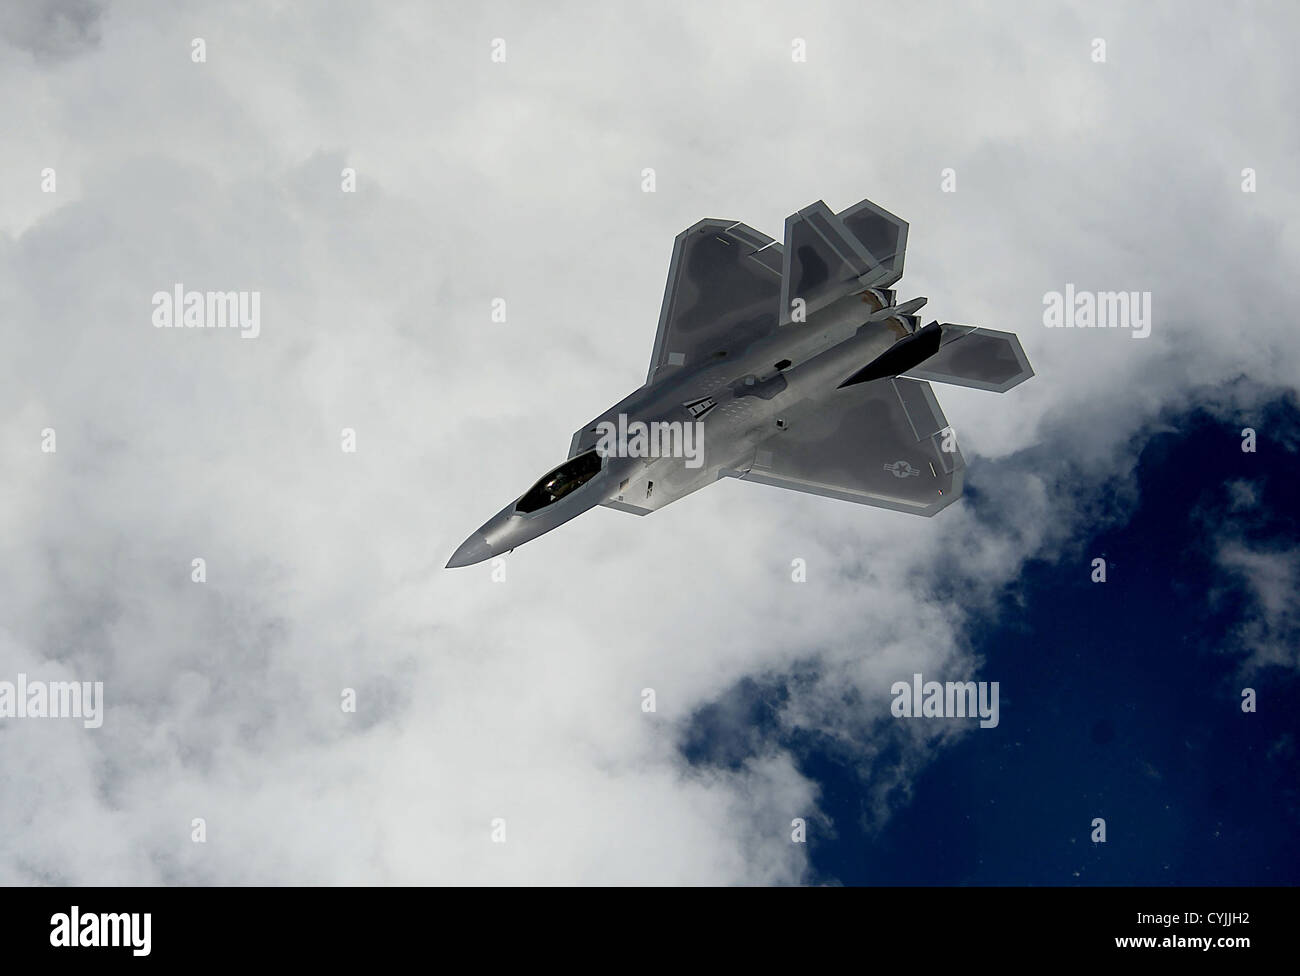 US Air Force F-22 Raptor performs July 10, 2012 over Andrews Air Force Base, Maryland. Stock Photo